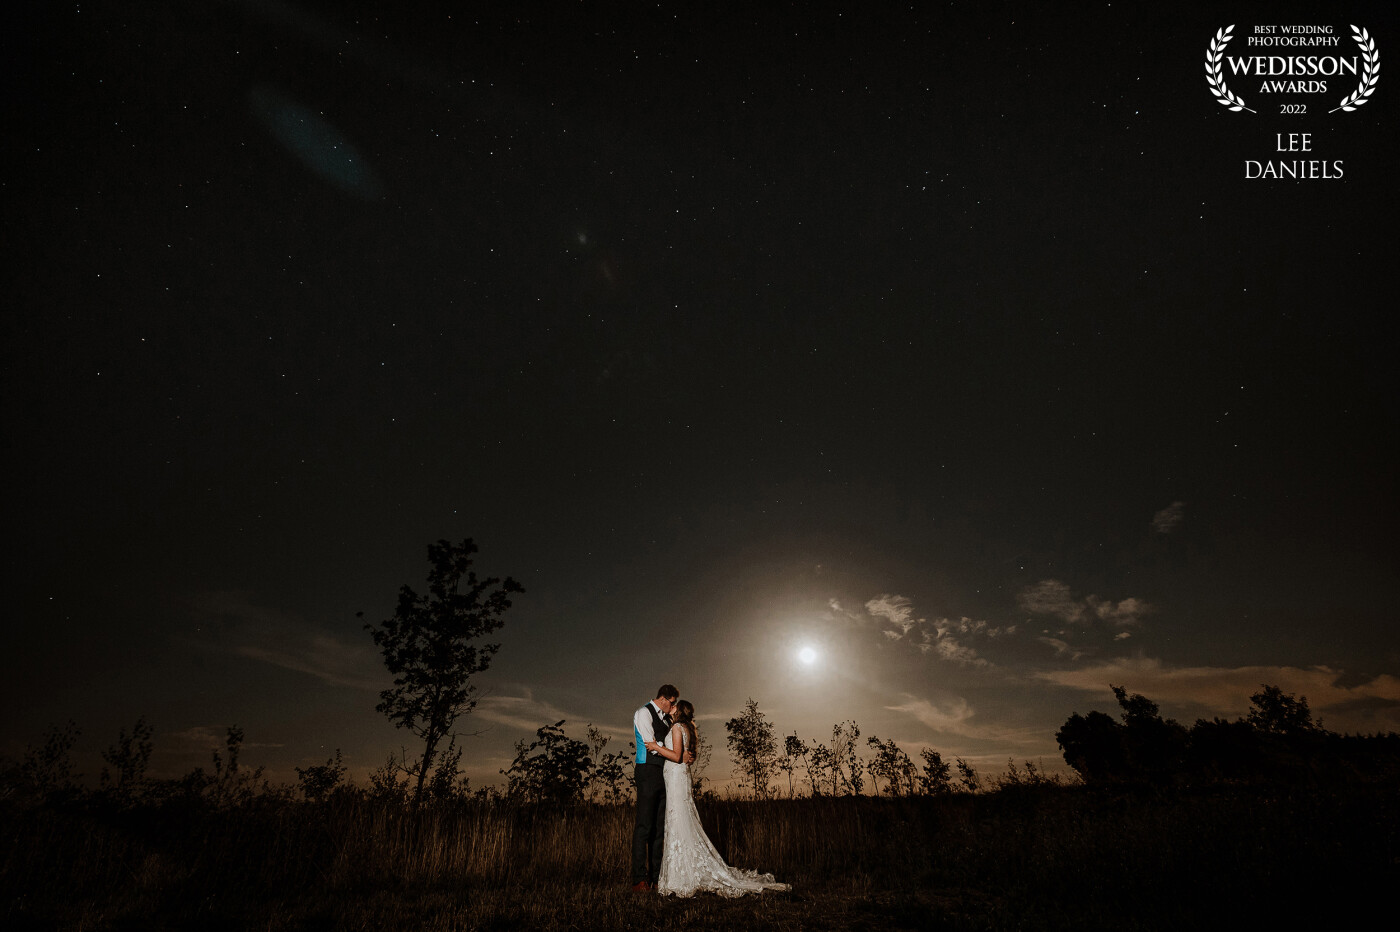 An autumn moon rises over Bassmead Manor Barns. Ricky & Danielle were more than willing to nip out and capture some nighttime portraits